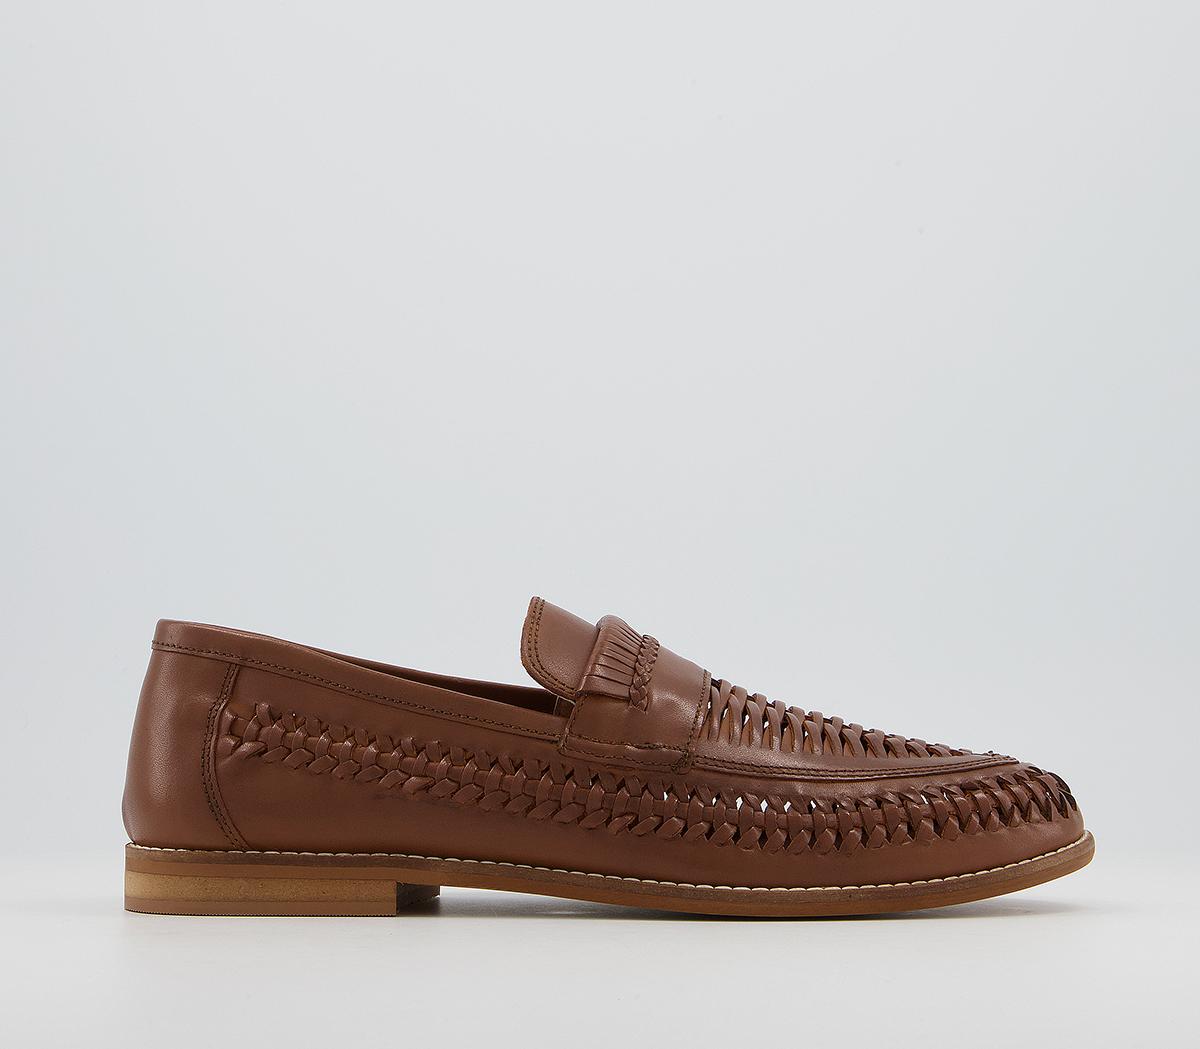 OFFICEChiswick Woven Saddle Slip On LoafersTan Leather